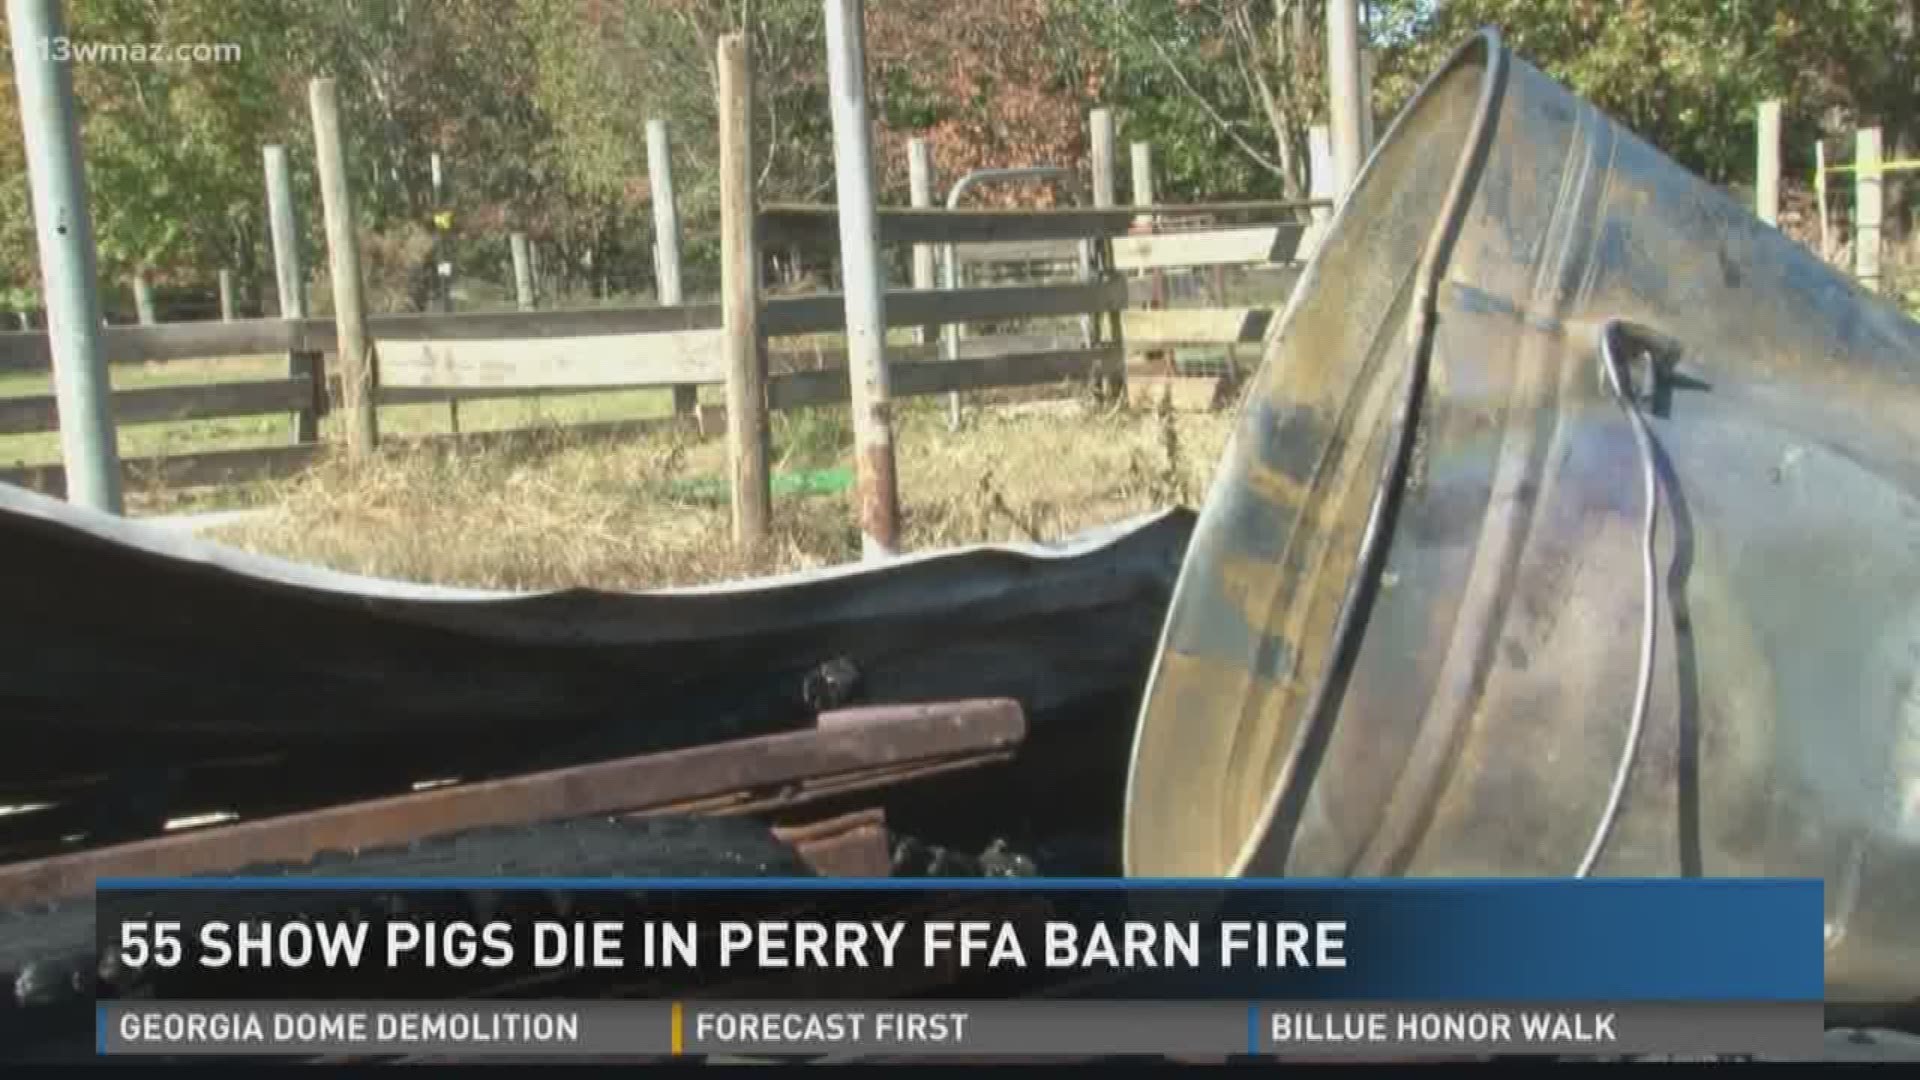 55 show pigs die in Perry FFA barn fire